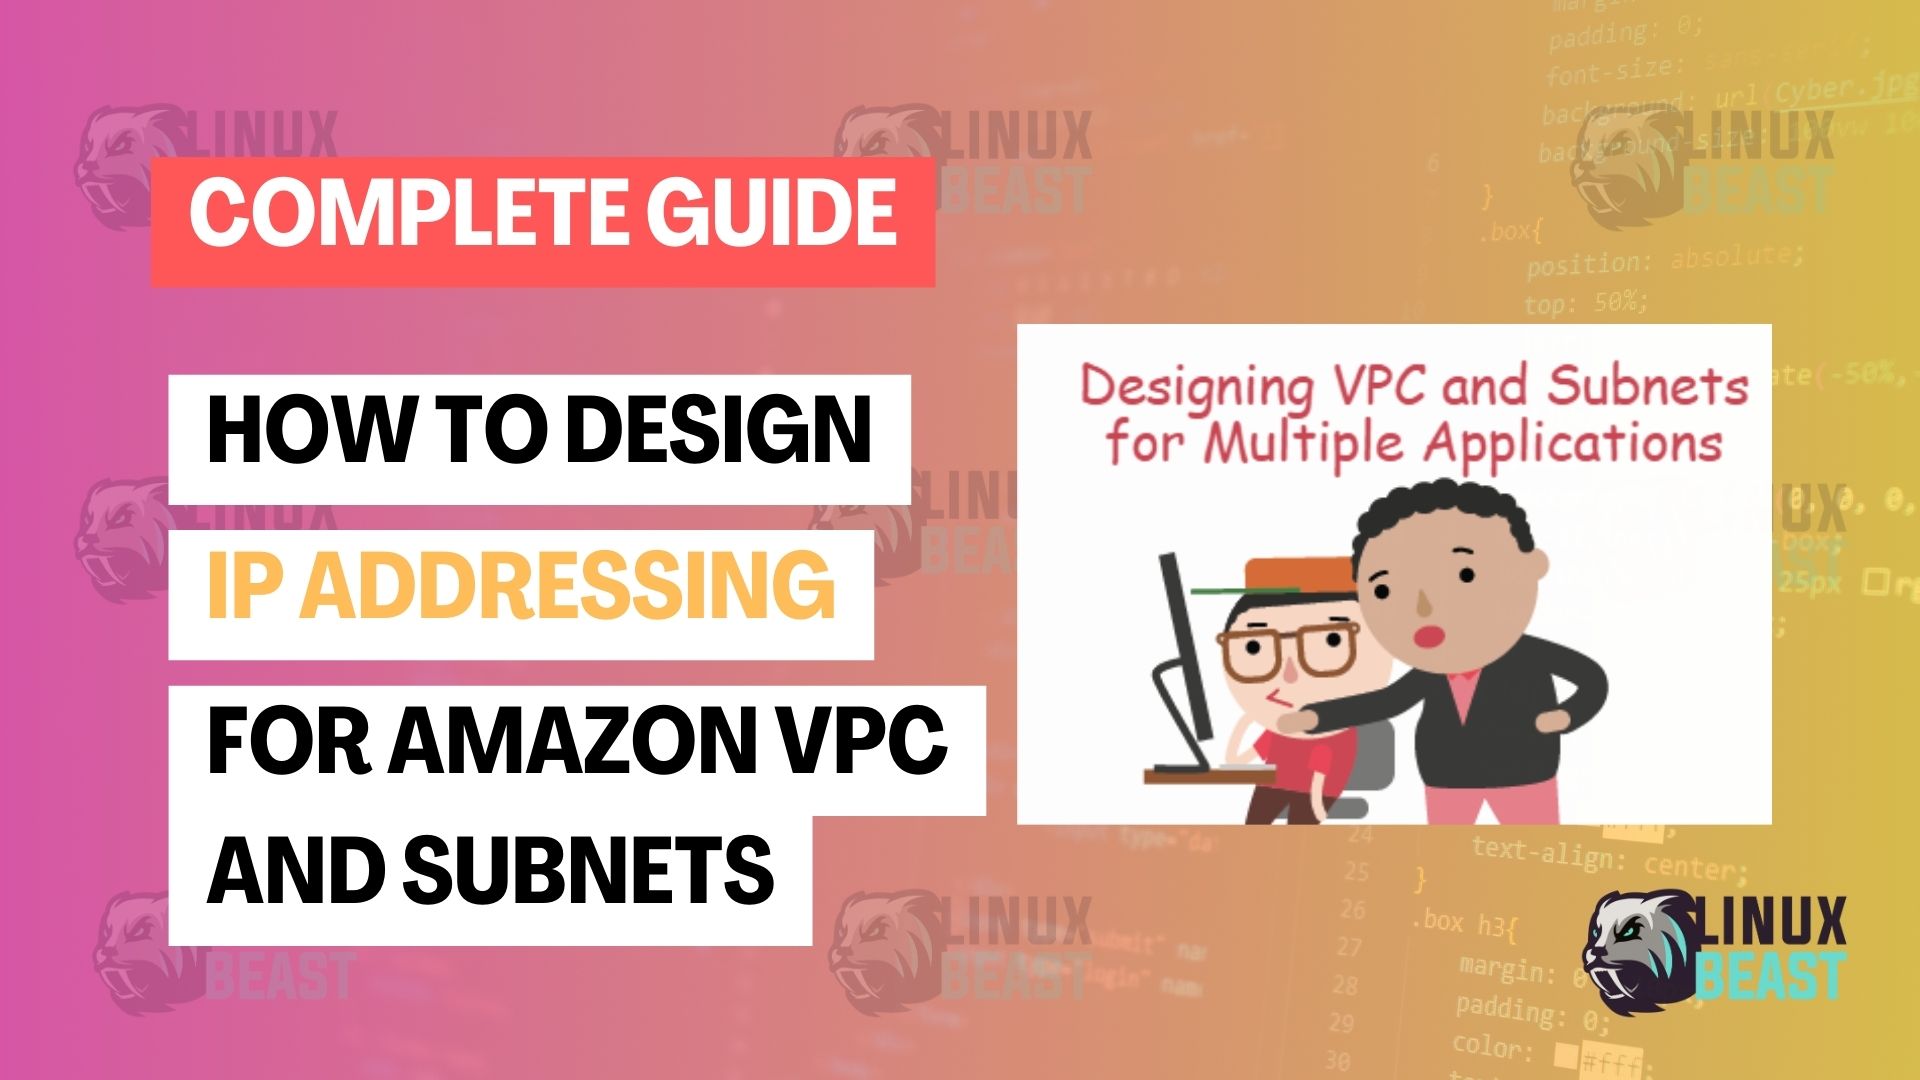 How to Design IP Addressing for Amazon VPC and Subnets